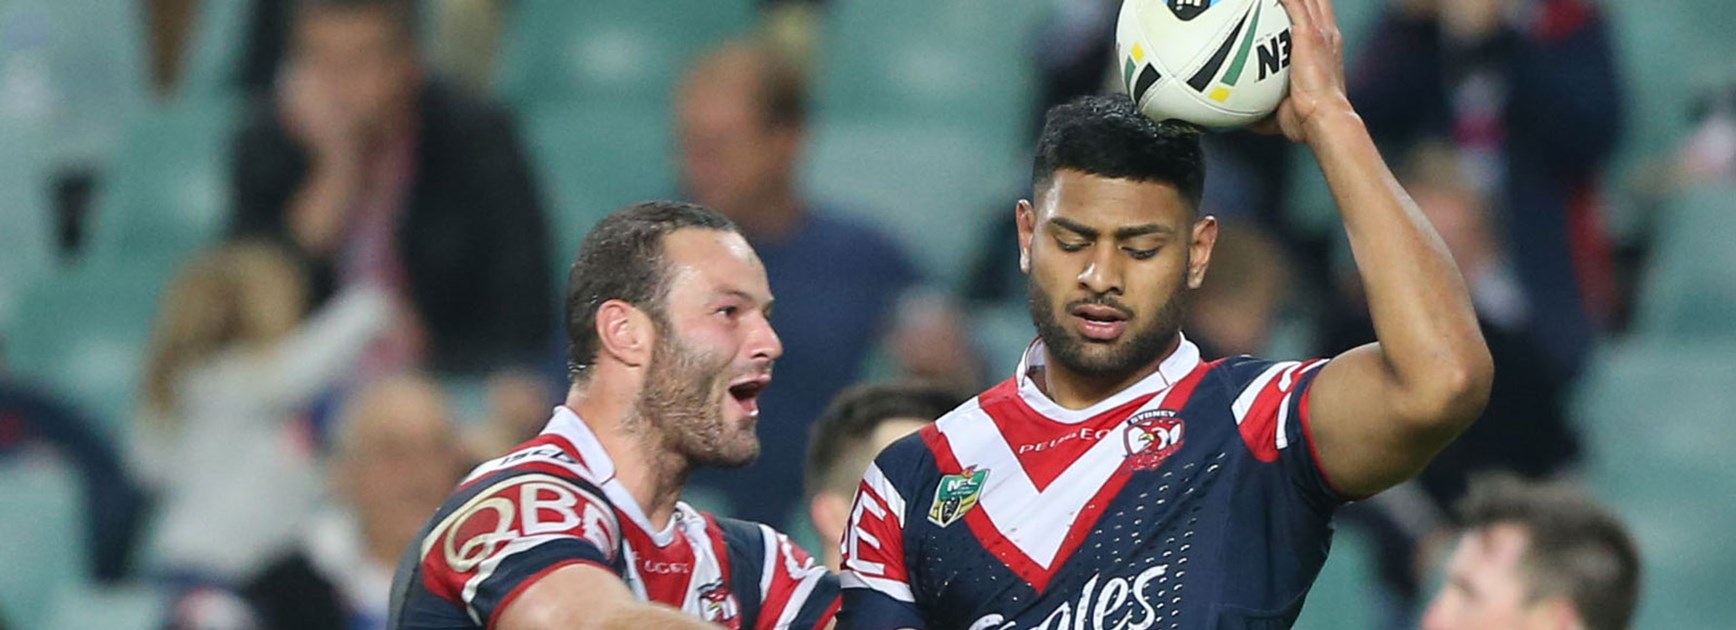 Roosters winger Daniel Tupou scored a hat-trick against the Tigers at Allianz Stadium.